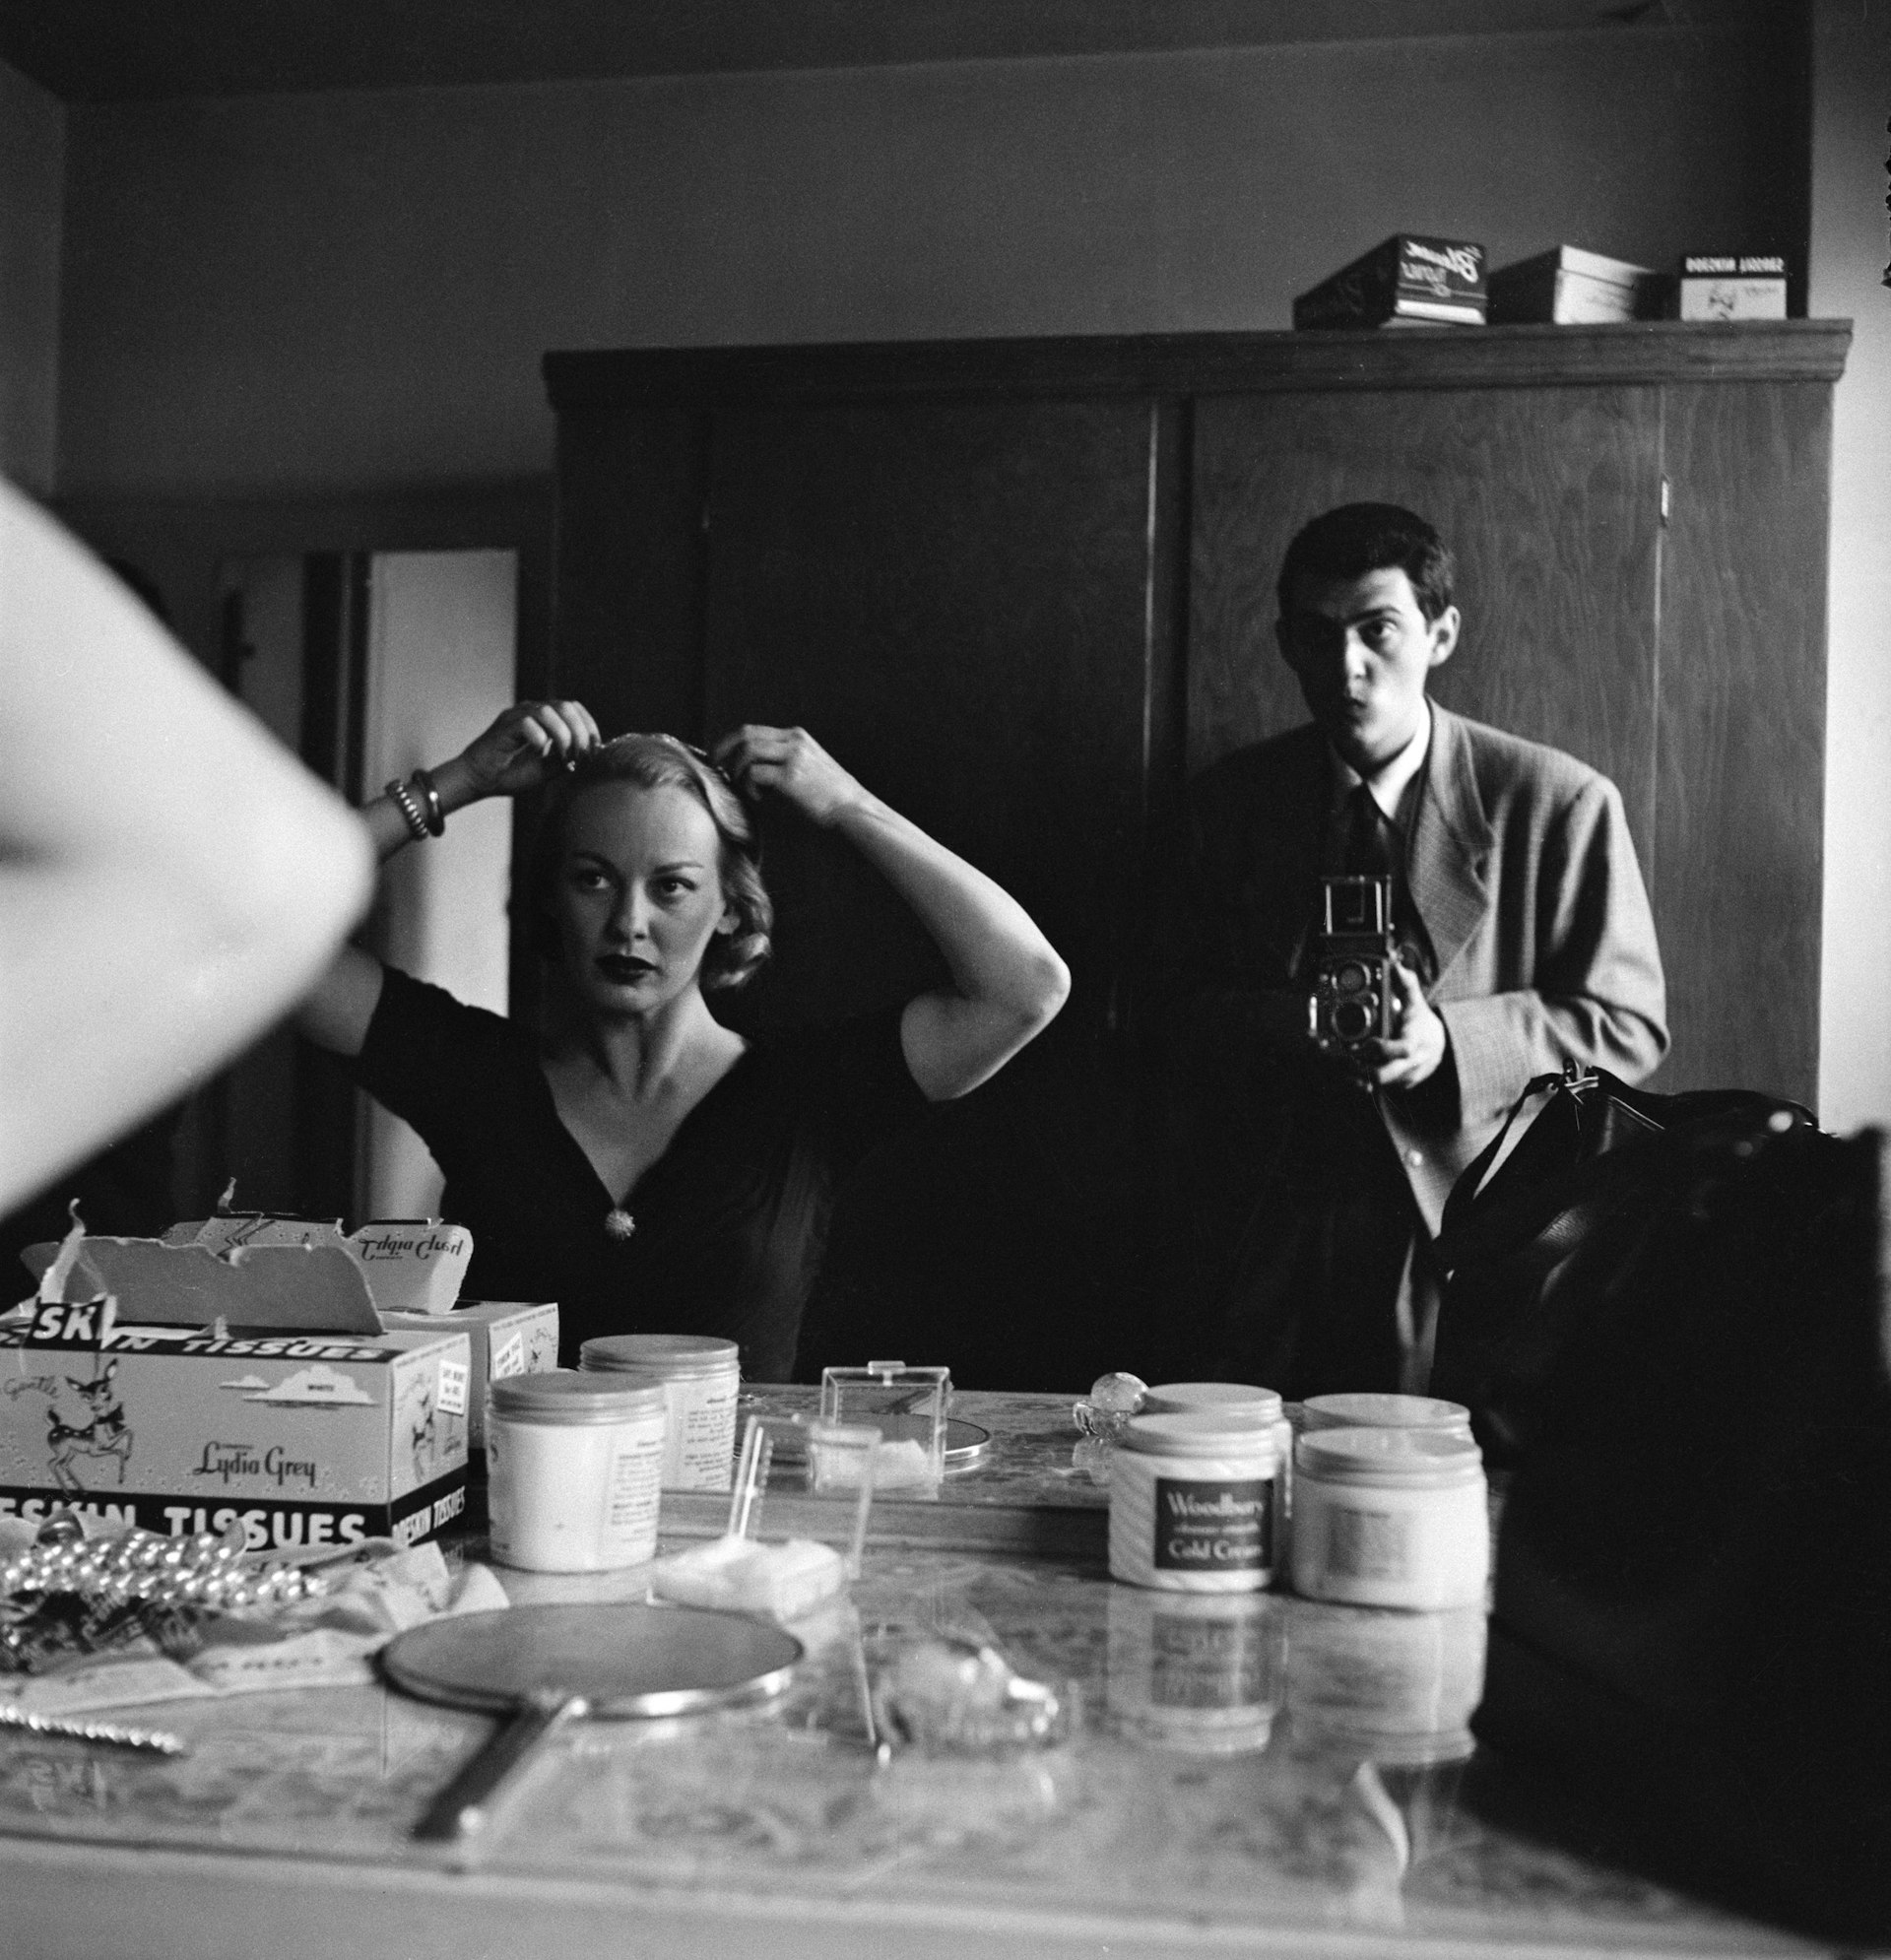 Stanley Kubrick, Stanley Kubrick with Faye Emerson from “Faye Emerson: Young Lady in a Hurry”, 1950